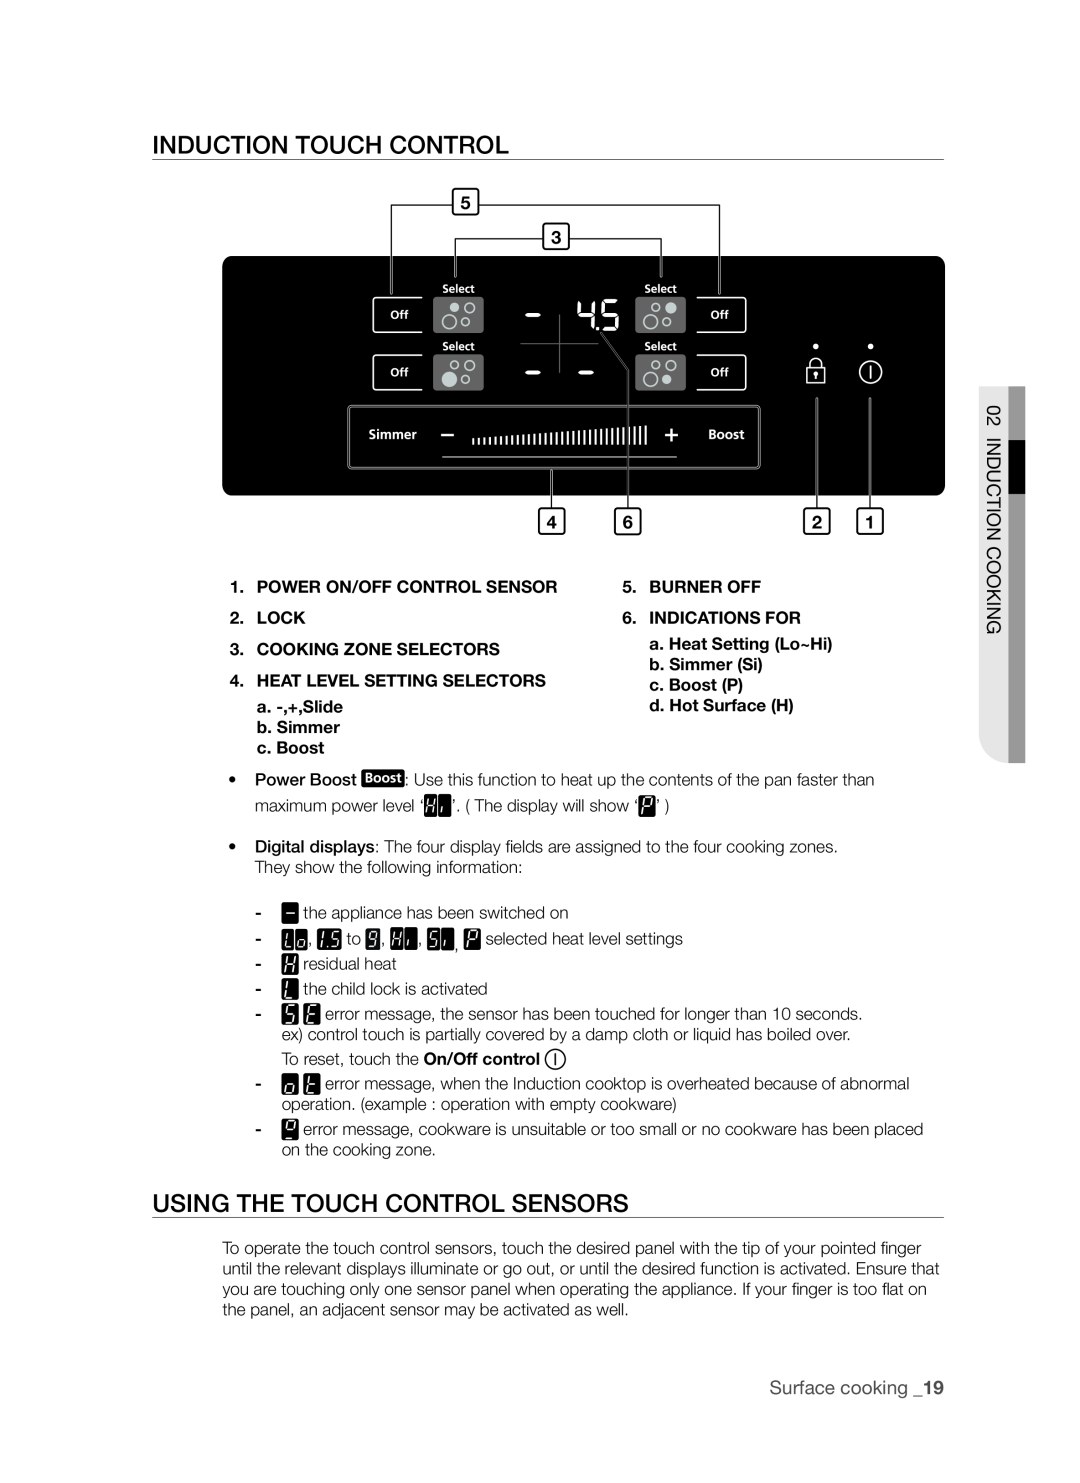 Samsung FTQ307NWGX user manual Induction touch control, Using the touch control sensors, Induction Cooking, Surface cooking 